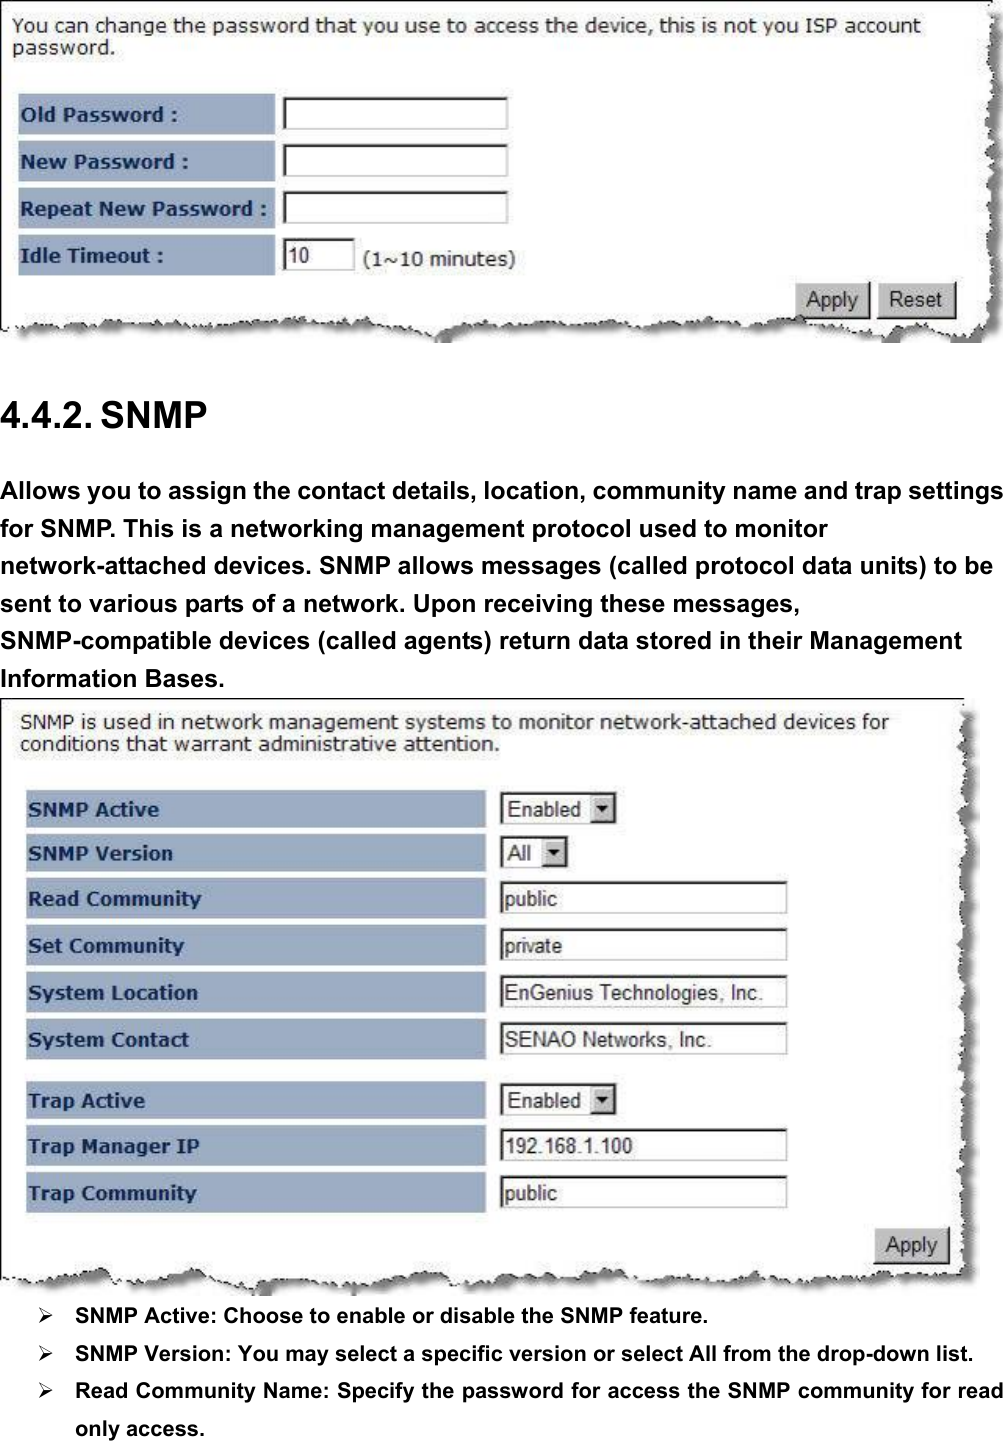  4.4.2. SNMP Allows you to assign the contact details, location, community name and trap settings for SNMP. This is a networking management protocol used to monitor network-attached devices. SNMP allows messages (called protocol data units) to be sent to various parts of a network. Upon receiving these messages, SNMP-compatible devices (called agents) return data stored in their Management Information Bases.  ¾ SNMP Active: Choose to enable or disable the SNMP feature. ¾ SNMP Version: You may select a specific version or select All from the drop-down list.   ¾ Read Community Name: Specify the password for access the SNMP community for read only access.   